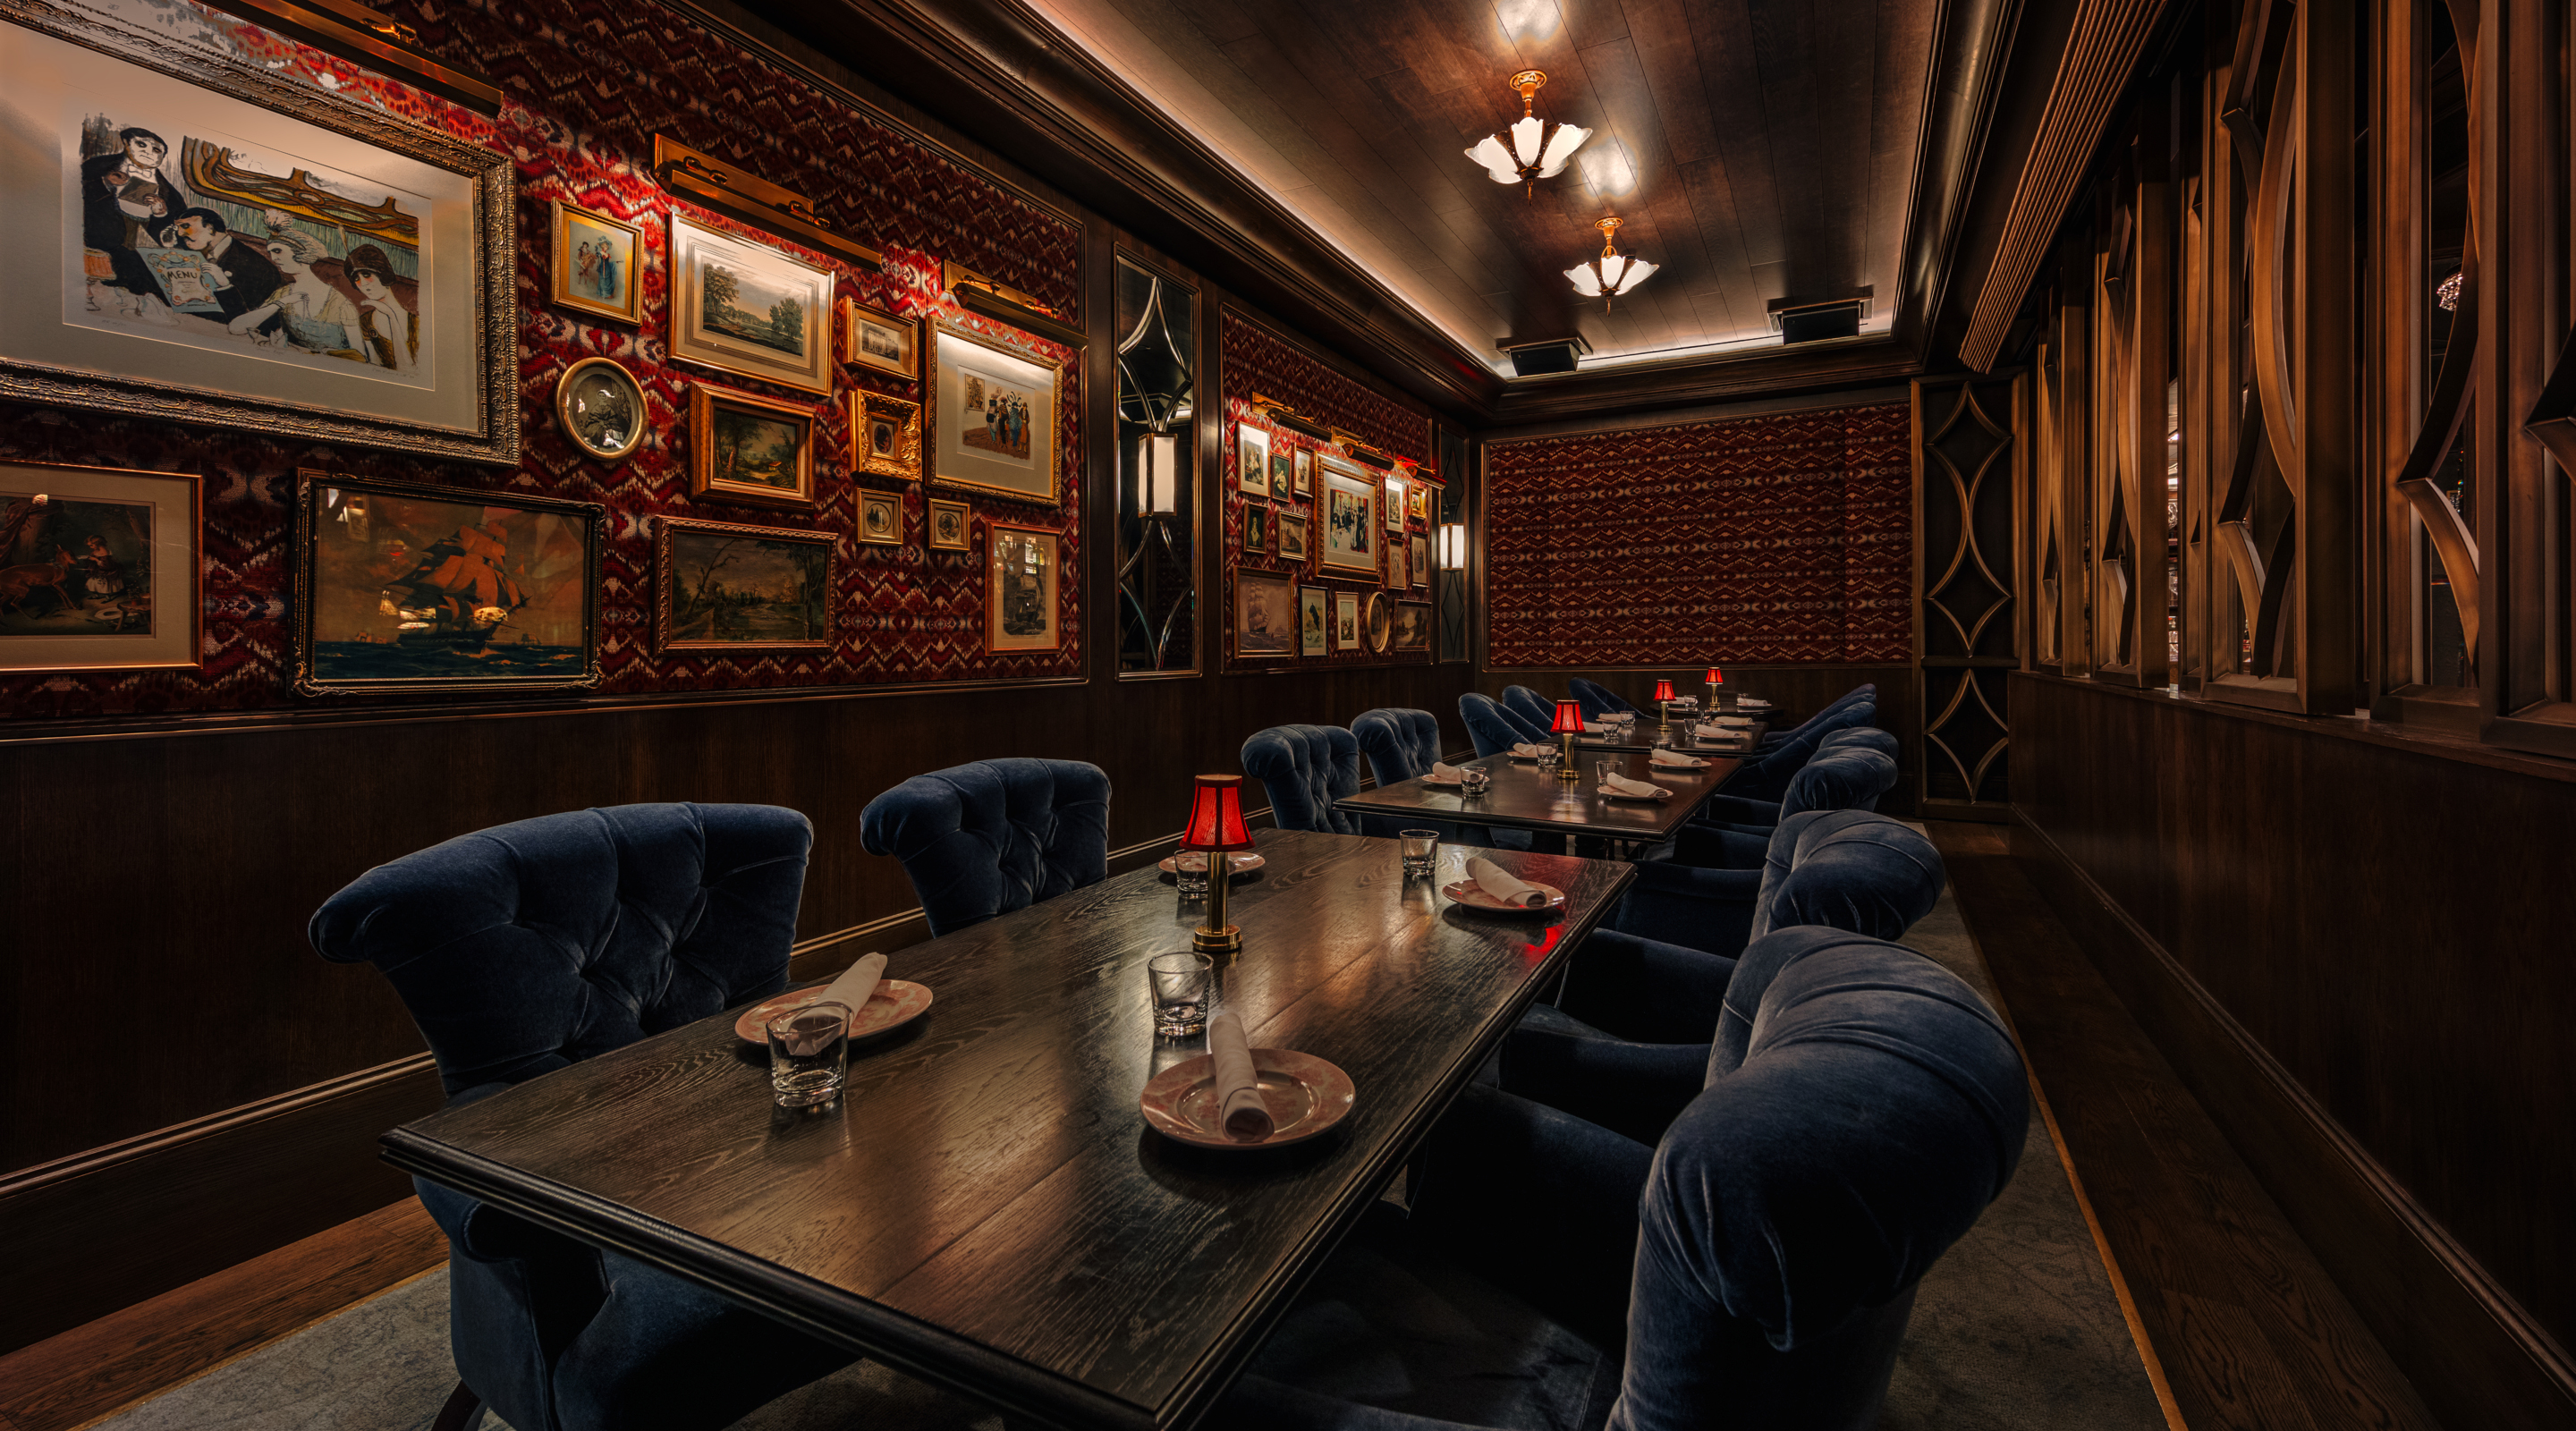 A view of the private dining room seating inside Bavettes.